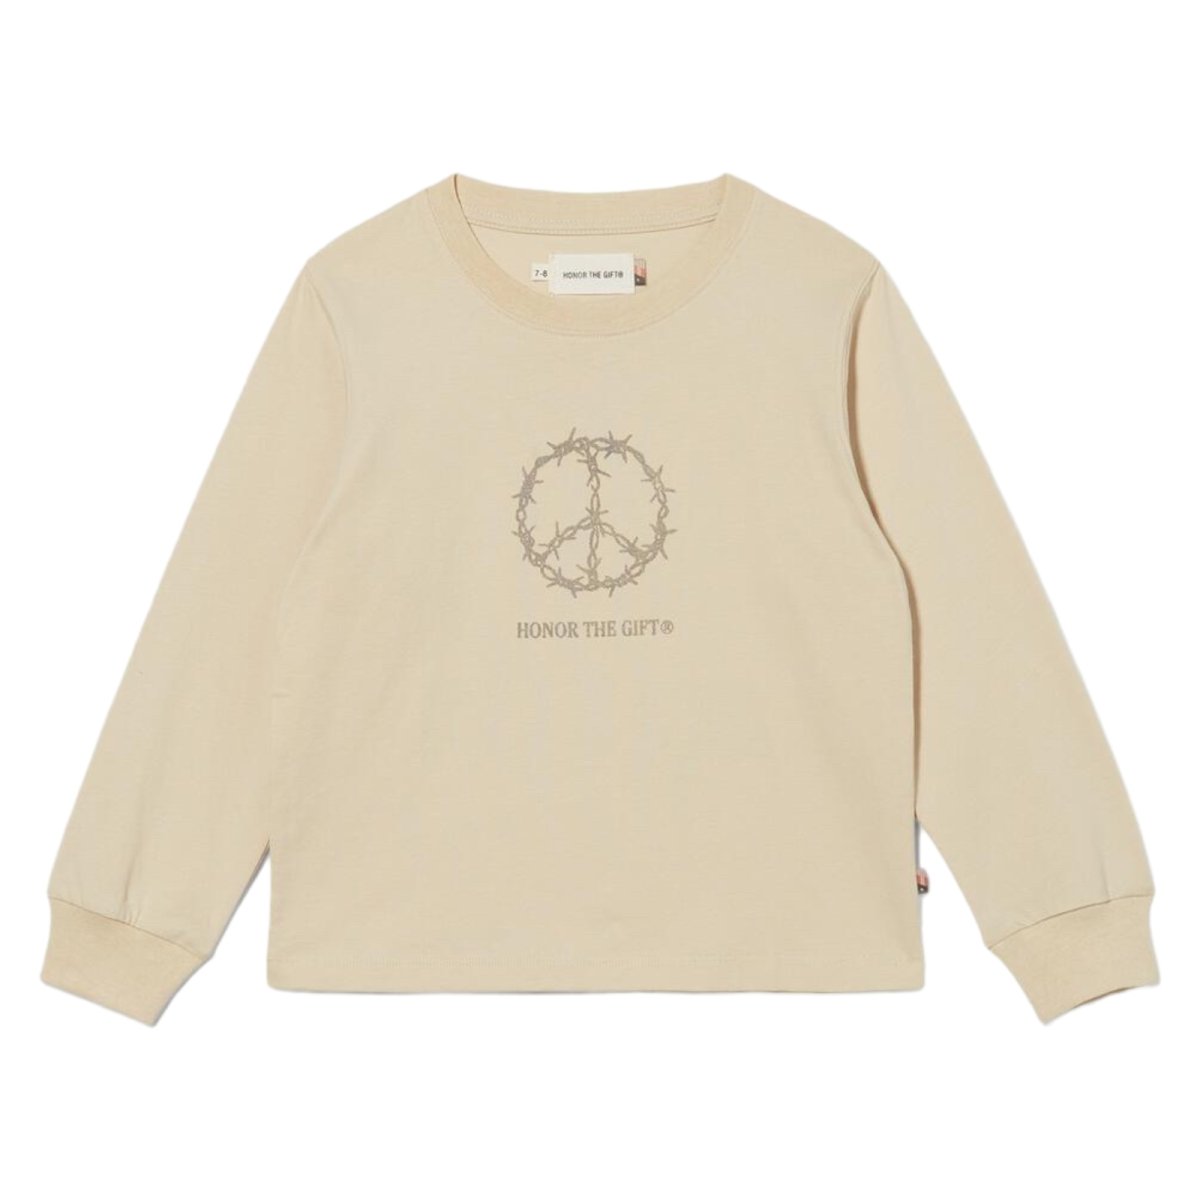 PEACE SIGN LONG SLEEVE TSHIRT - SWEATERS